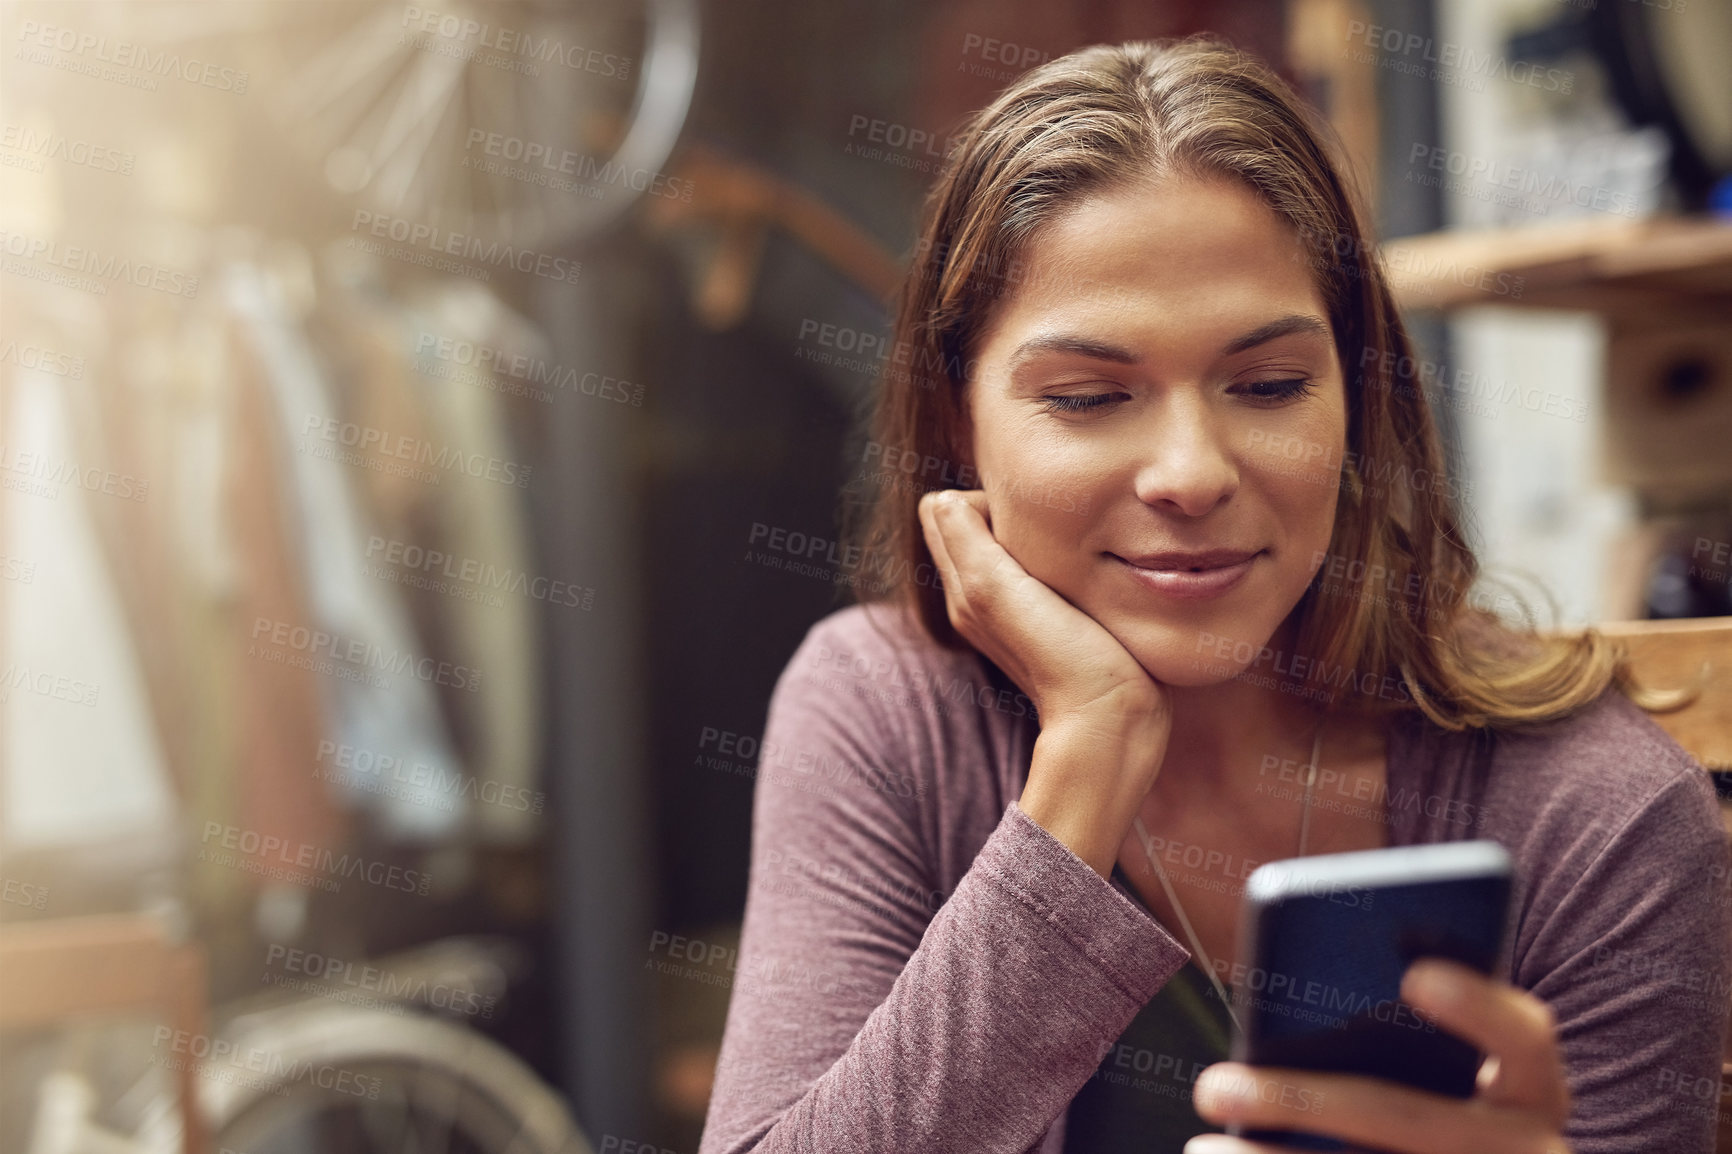 Buy stock photo Shot of a young woman using her phone in a cafe